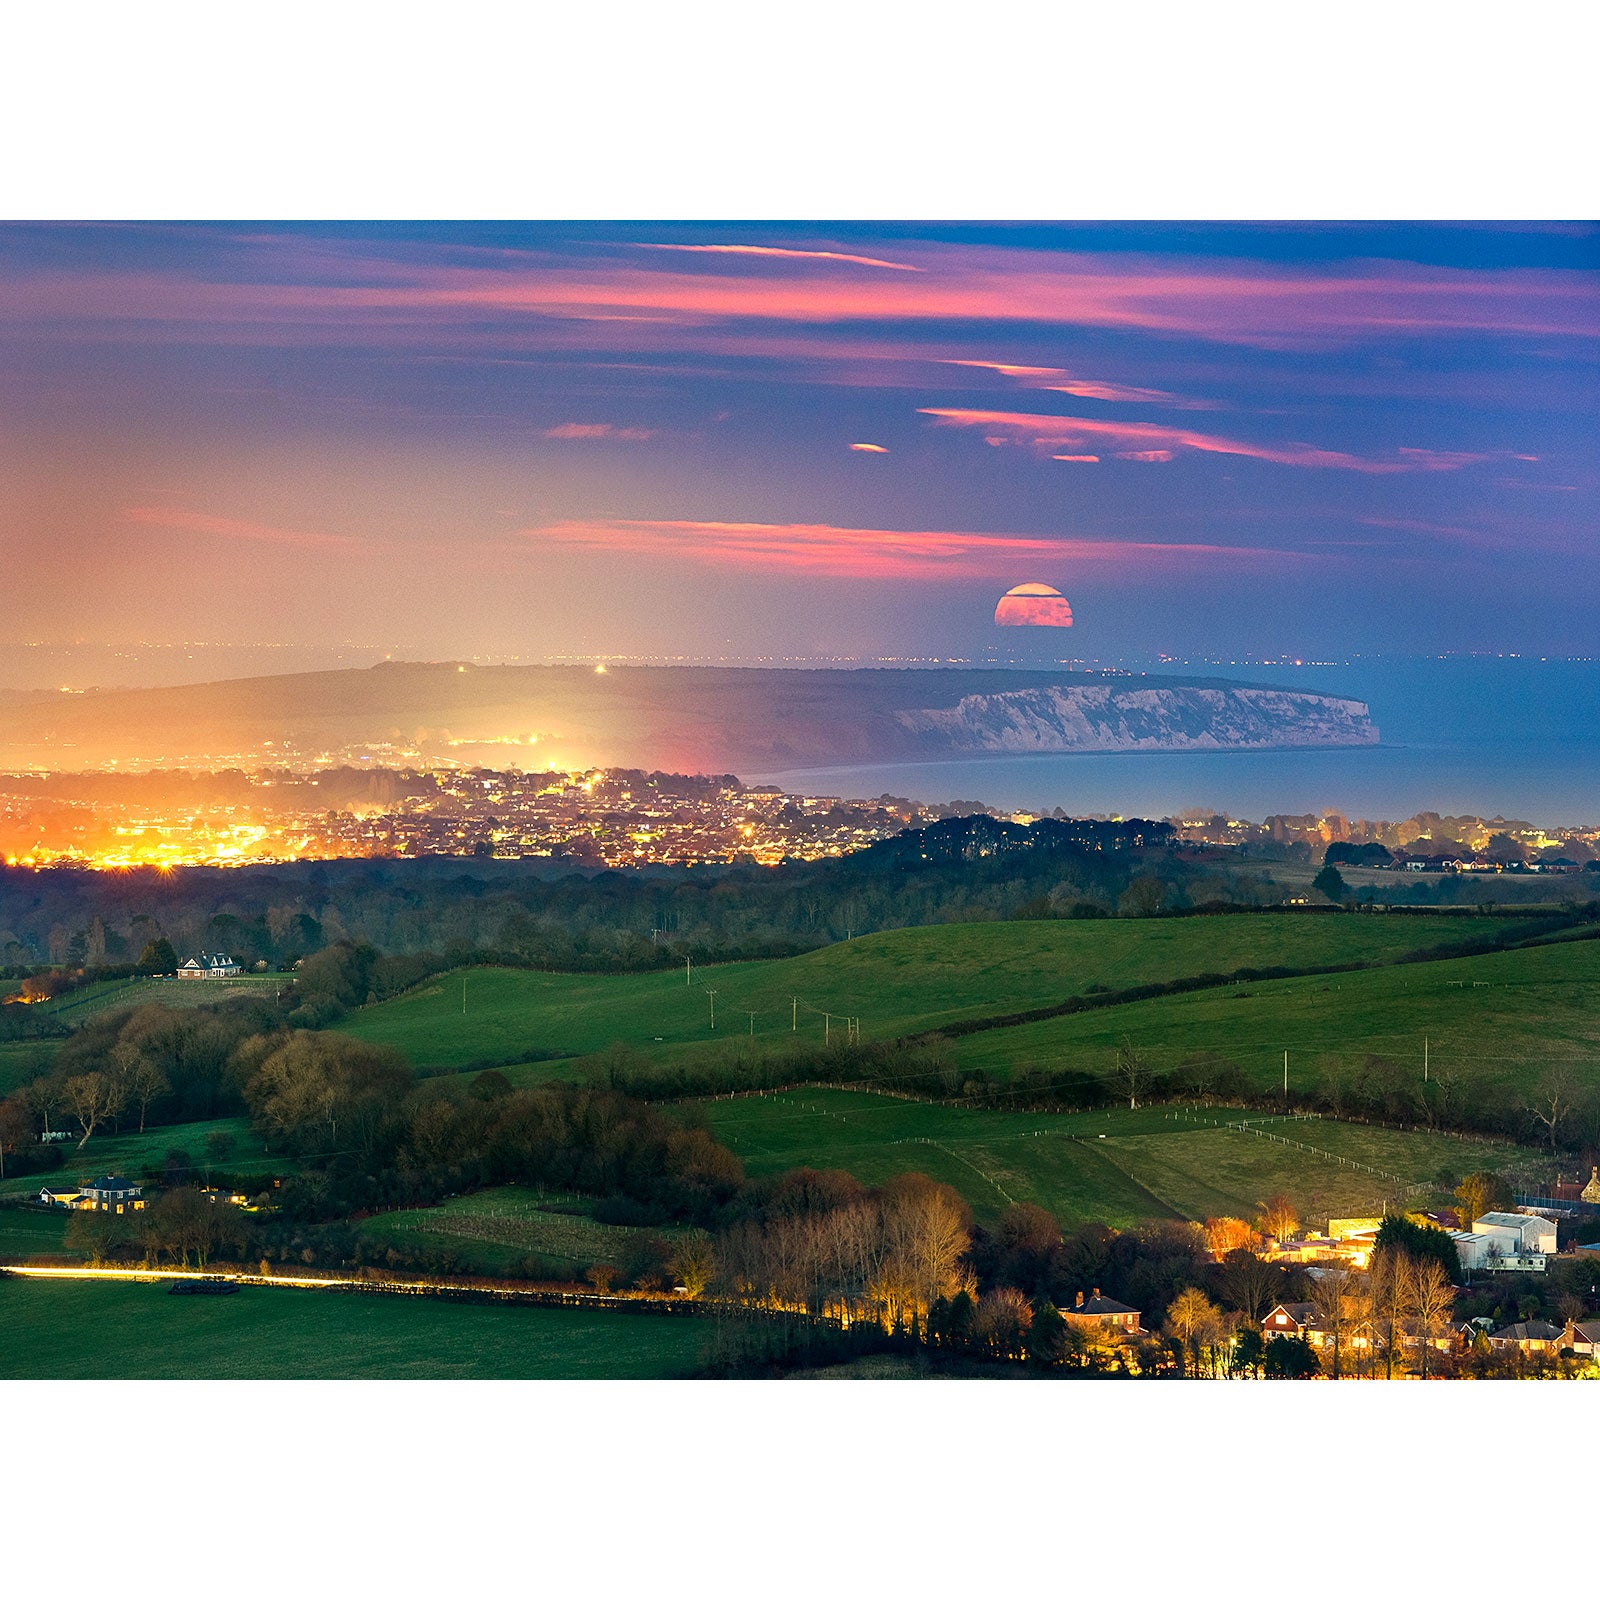 A Moonrise over Sandown Bay rising over a coastal landscape at twilight, with city lights twinkling below on the Isle of Wight. (Available Light Photography)